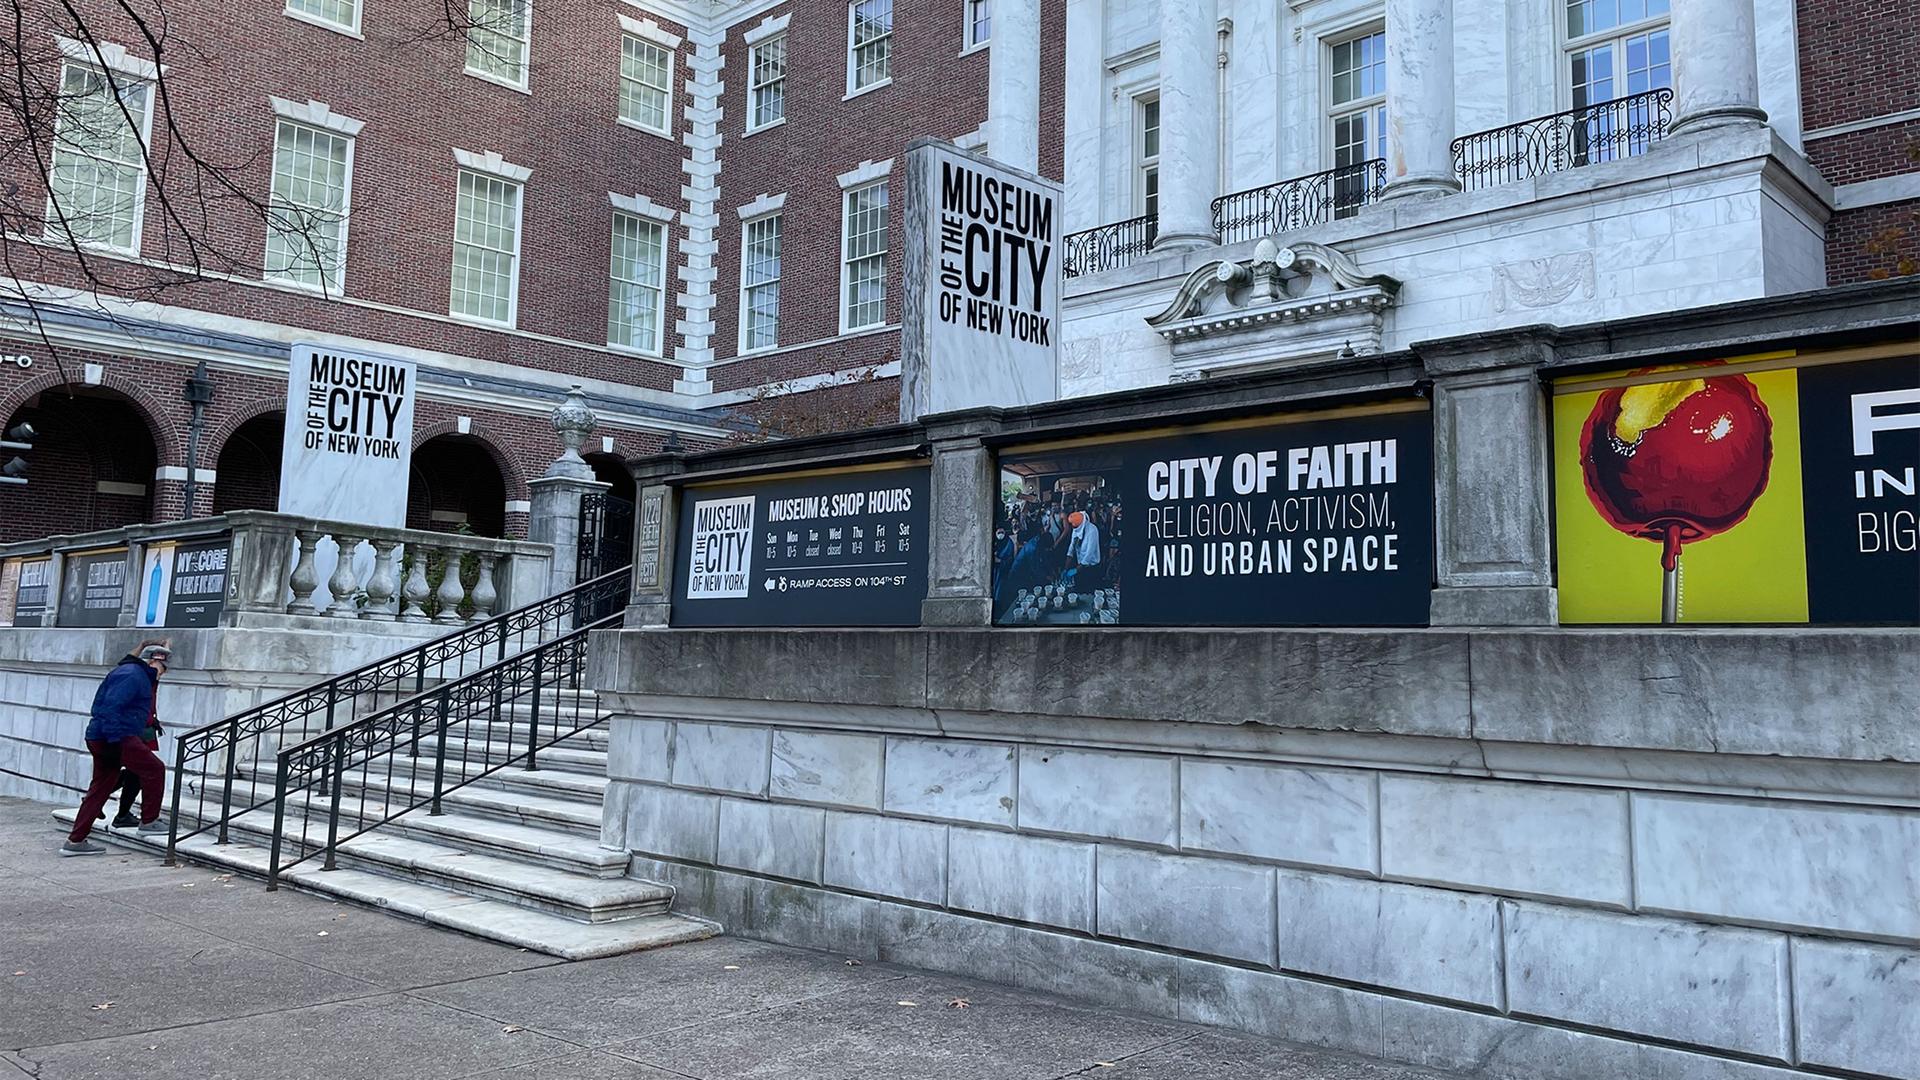 Exterior of the Museum of the City of New York, with a promotion for the "City of Faith" exhibition currently on display, New York, Dec. 1, 2022.